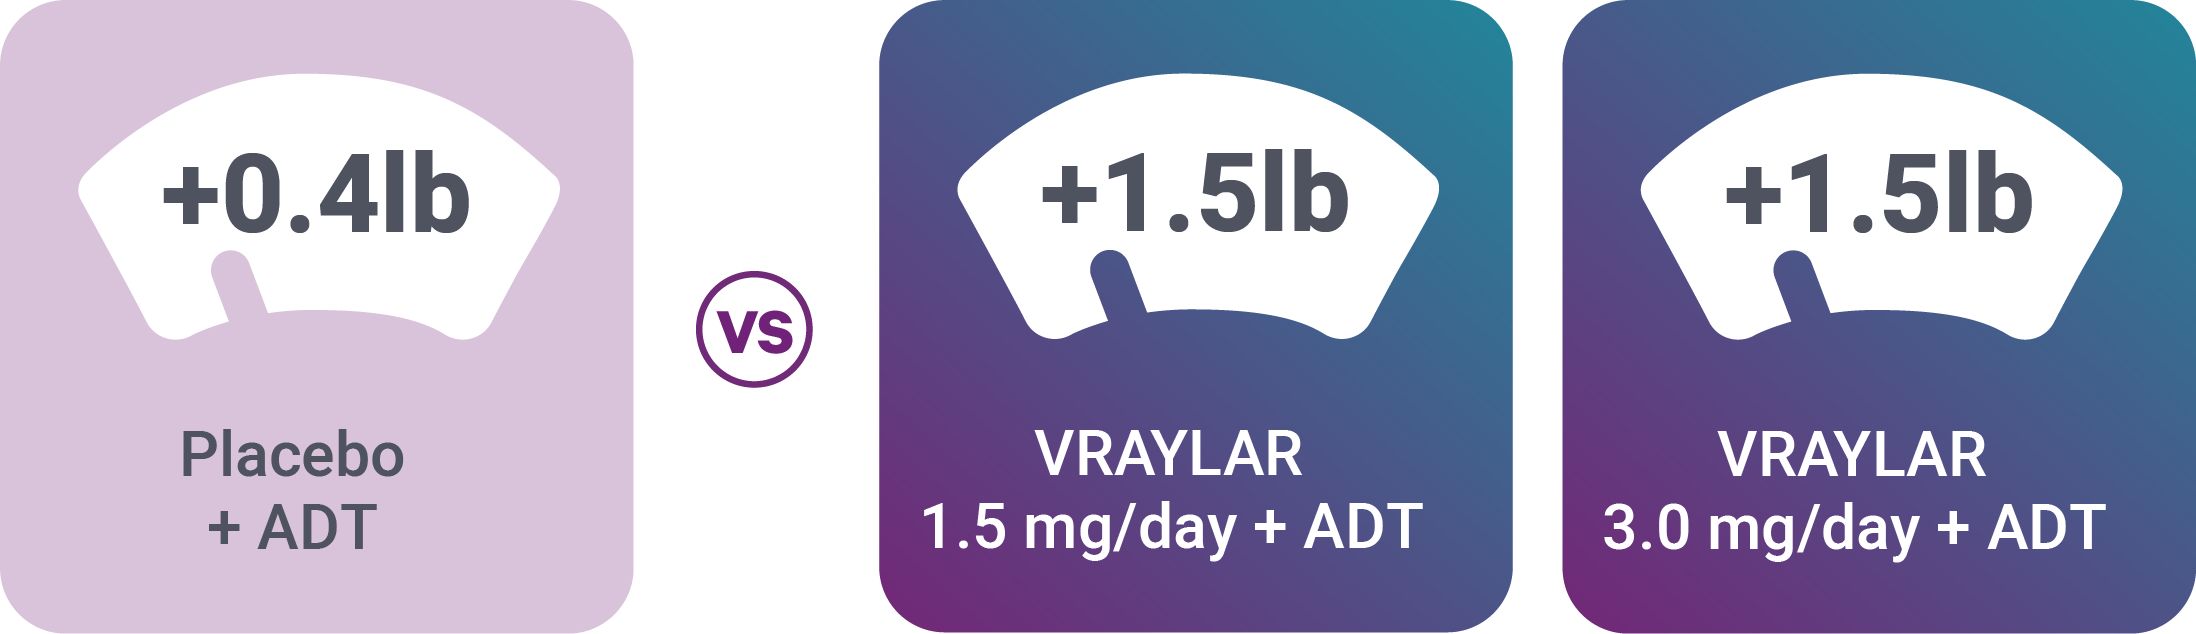 Average weight change in 6 week major depressive disorder studies for the placebo plus ADT was 0.4 lb, VRAYLAR 1.5mg per day plus ADT was 1.5 lb, and VRAYLAR 3.0 mg per day plus ADT was 1.5 lb.